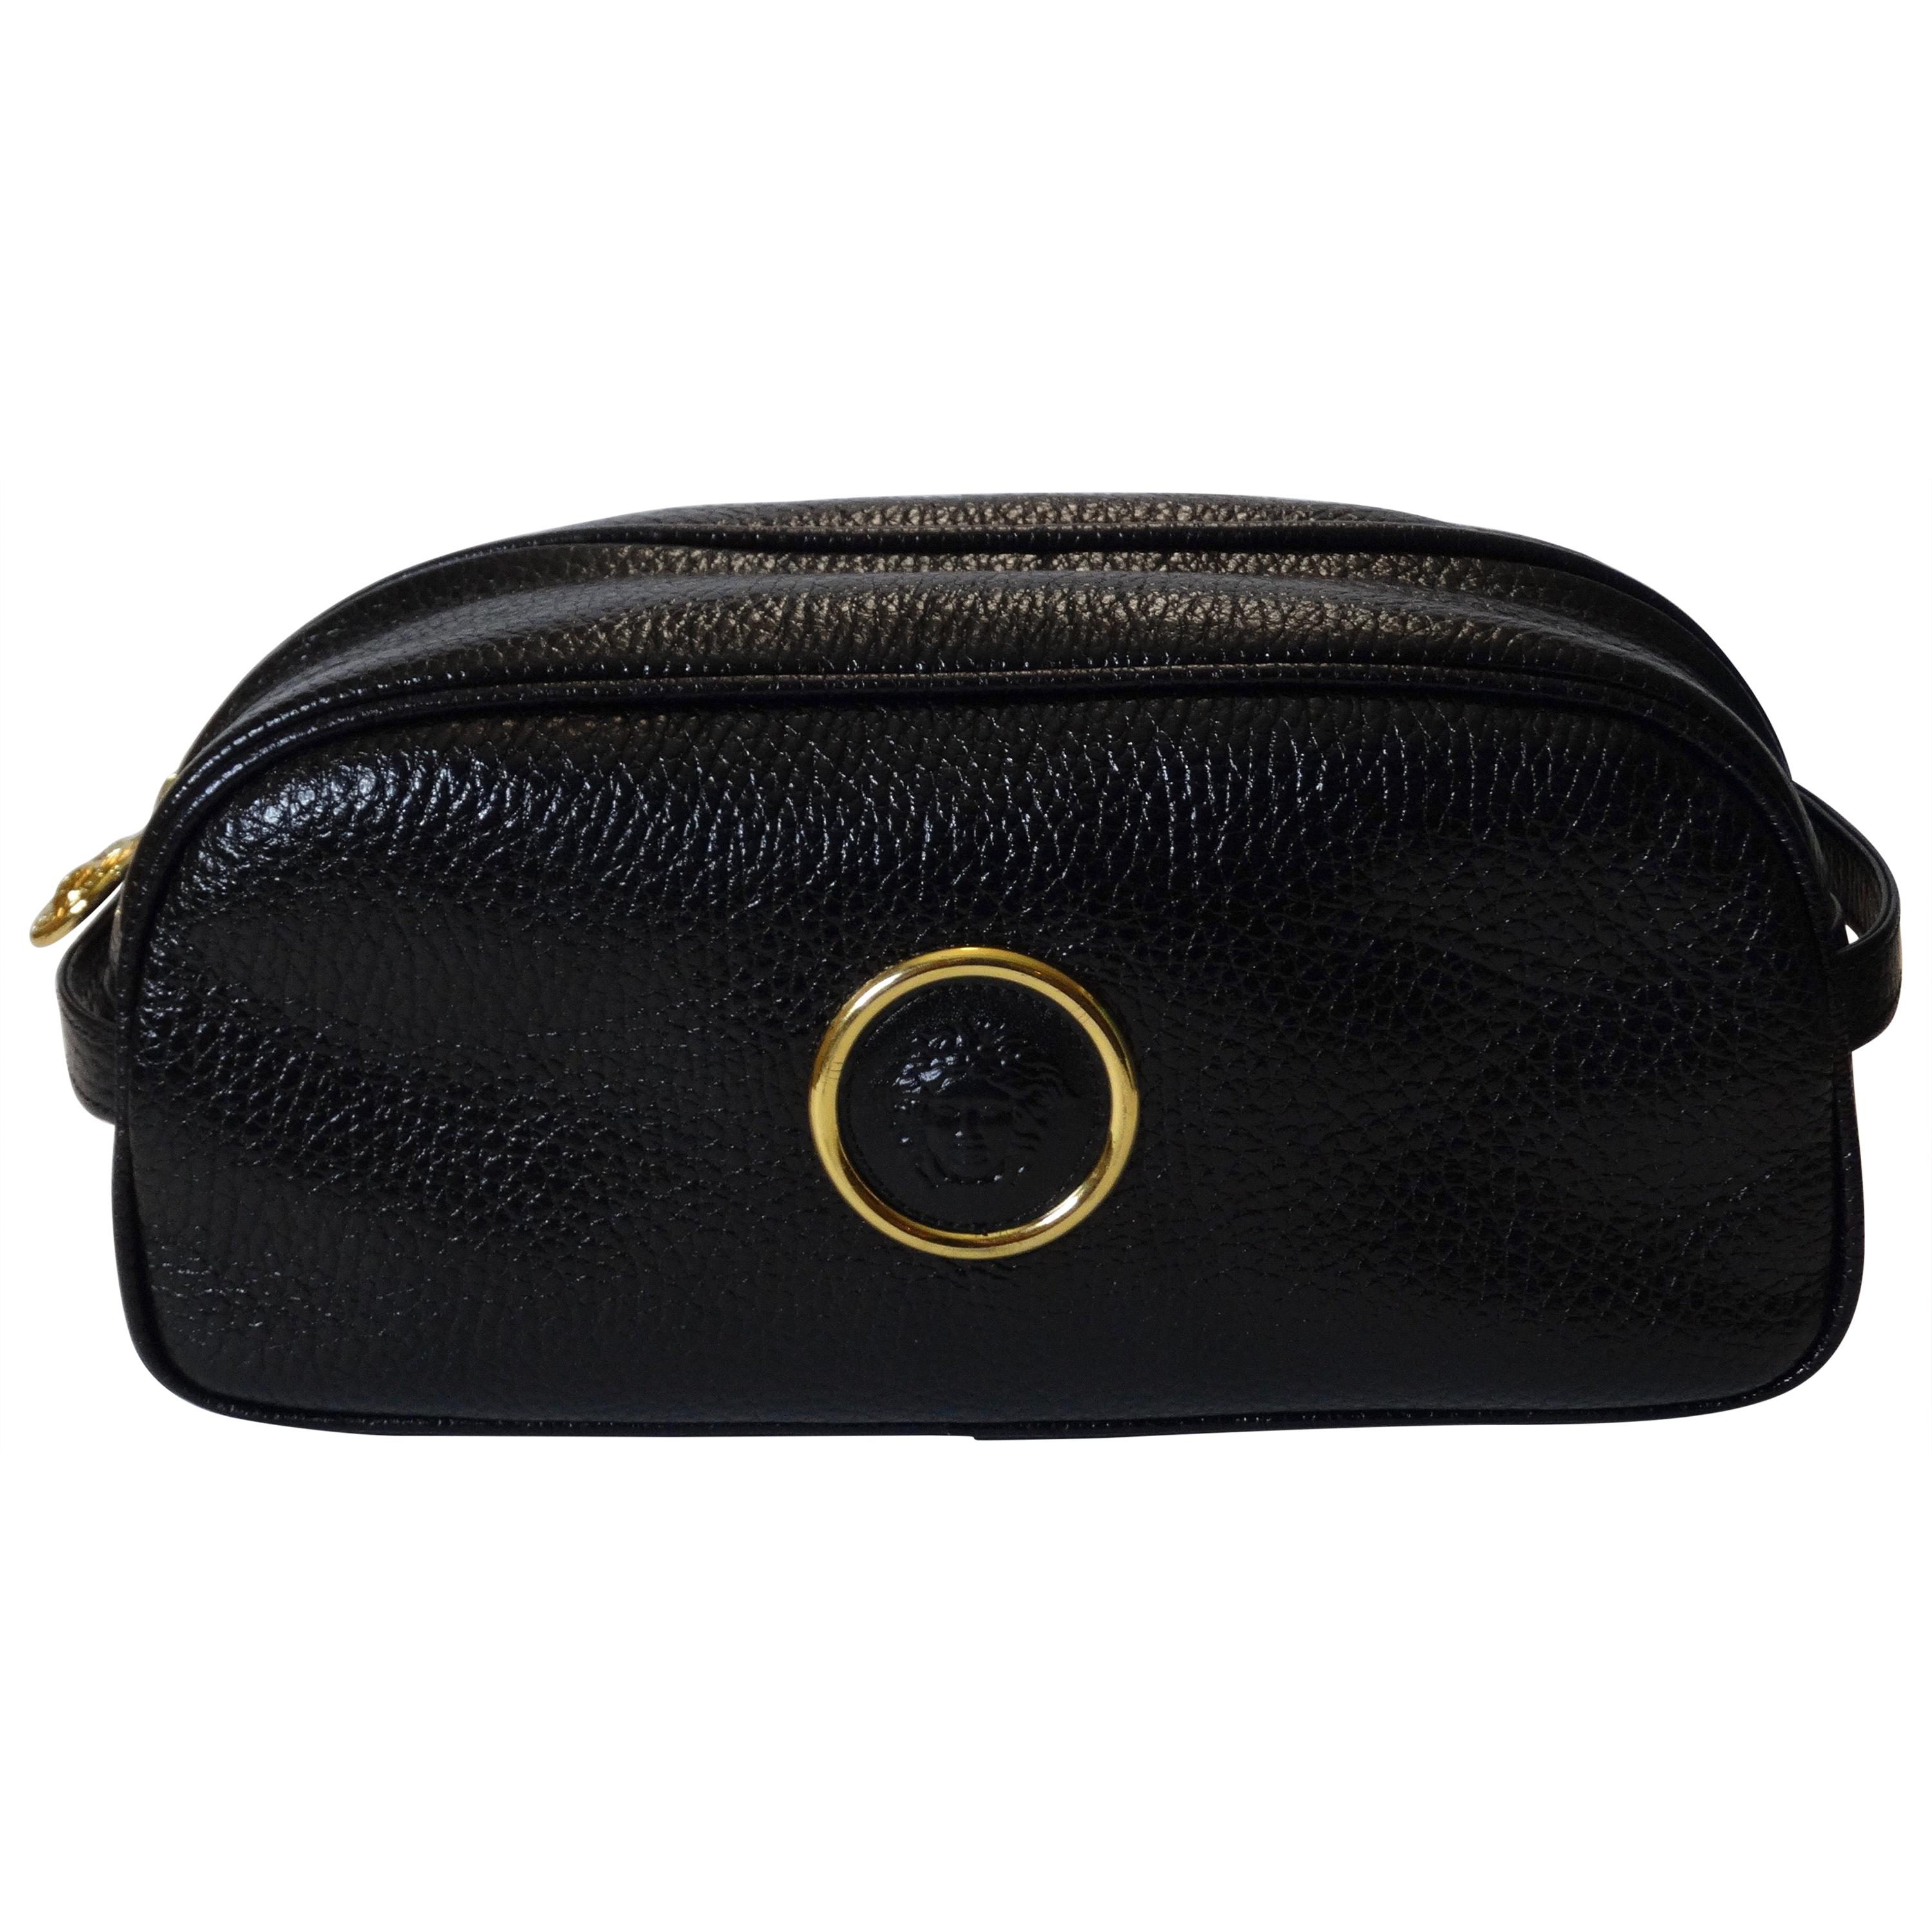 Gianni Versace 1990s Black Leather Cosmetic Bag